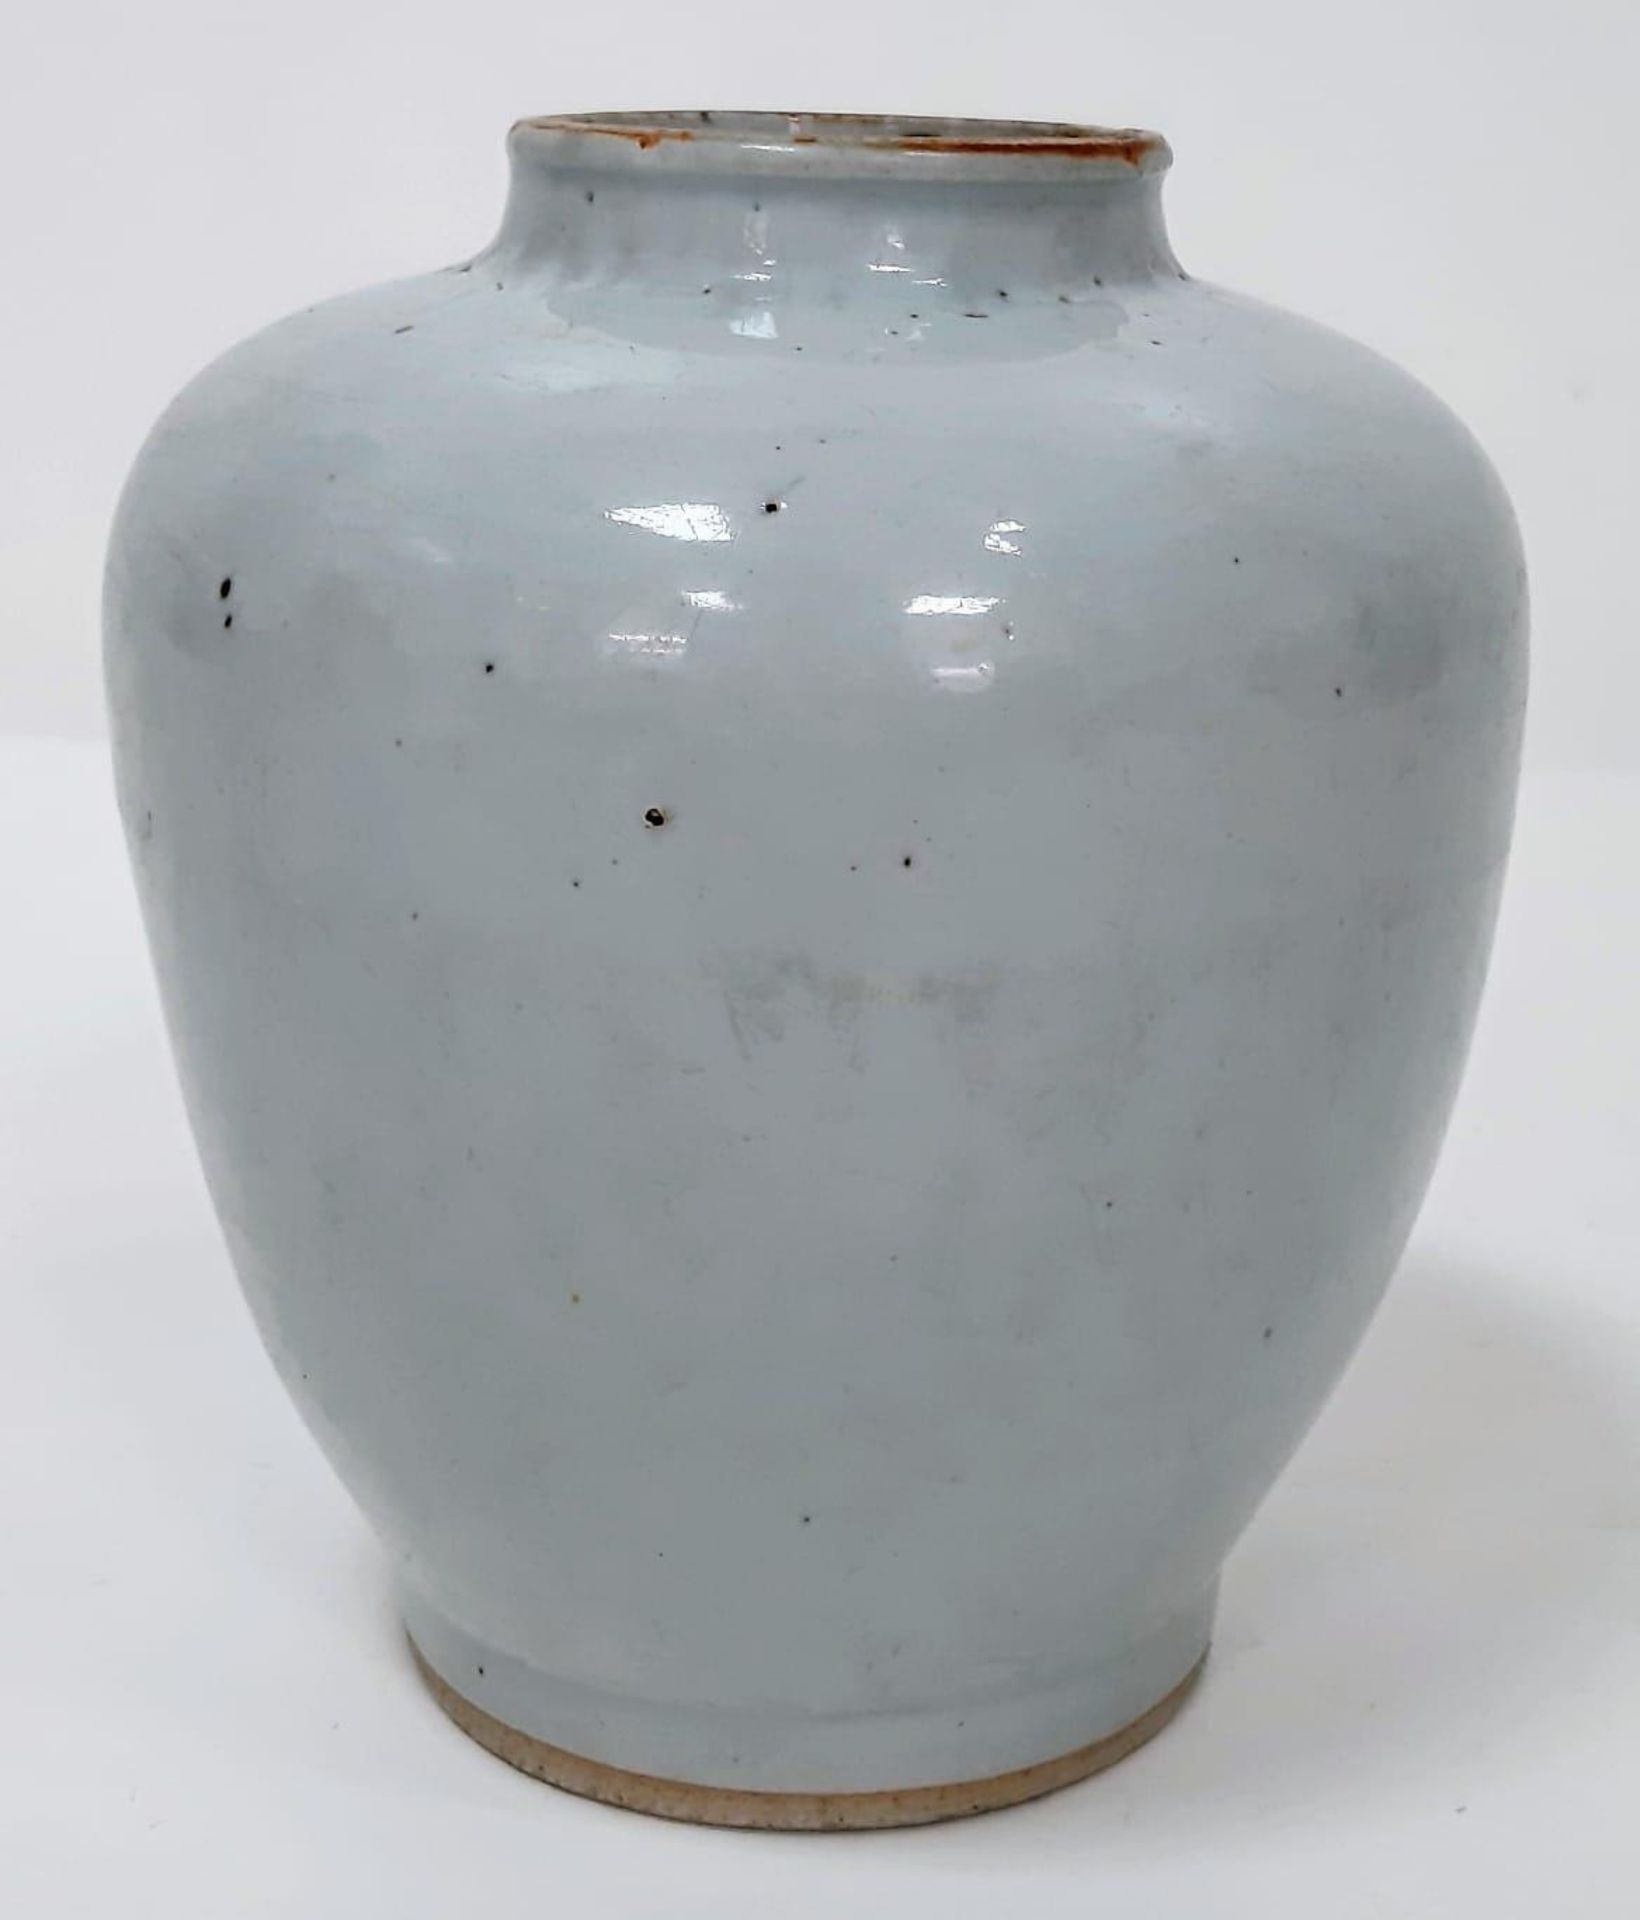 A 14th Century Chinese Vase. Traditional to the time, the lines and curves of this vase are